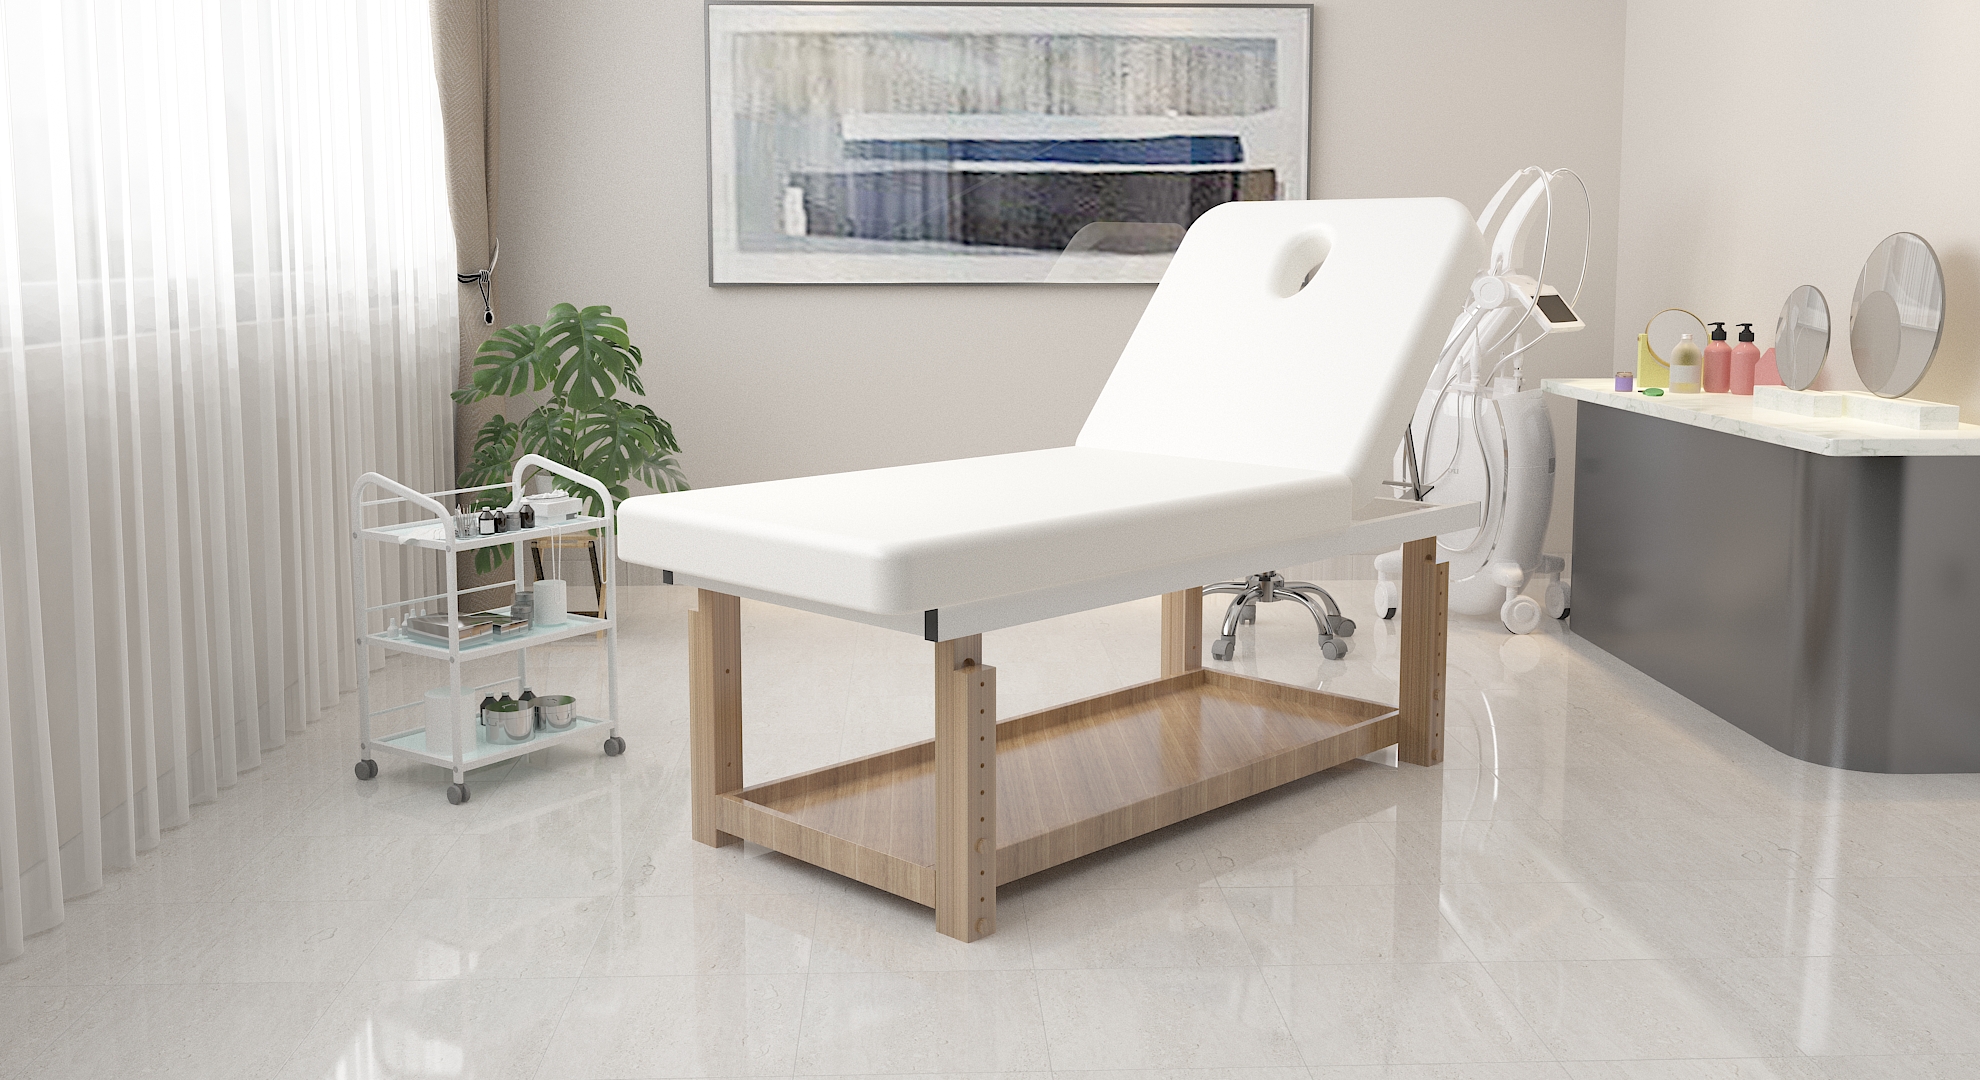 Multifunctional Adjustable Physiotherapy Massage Beds